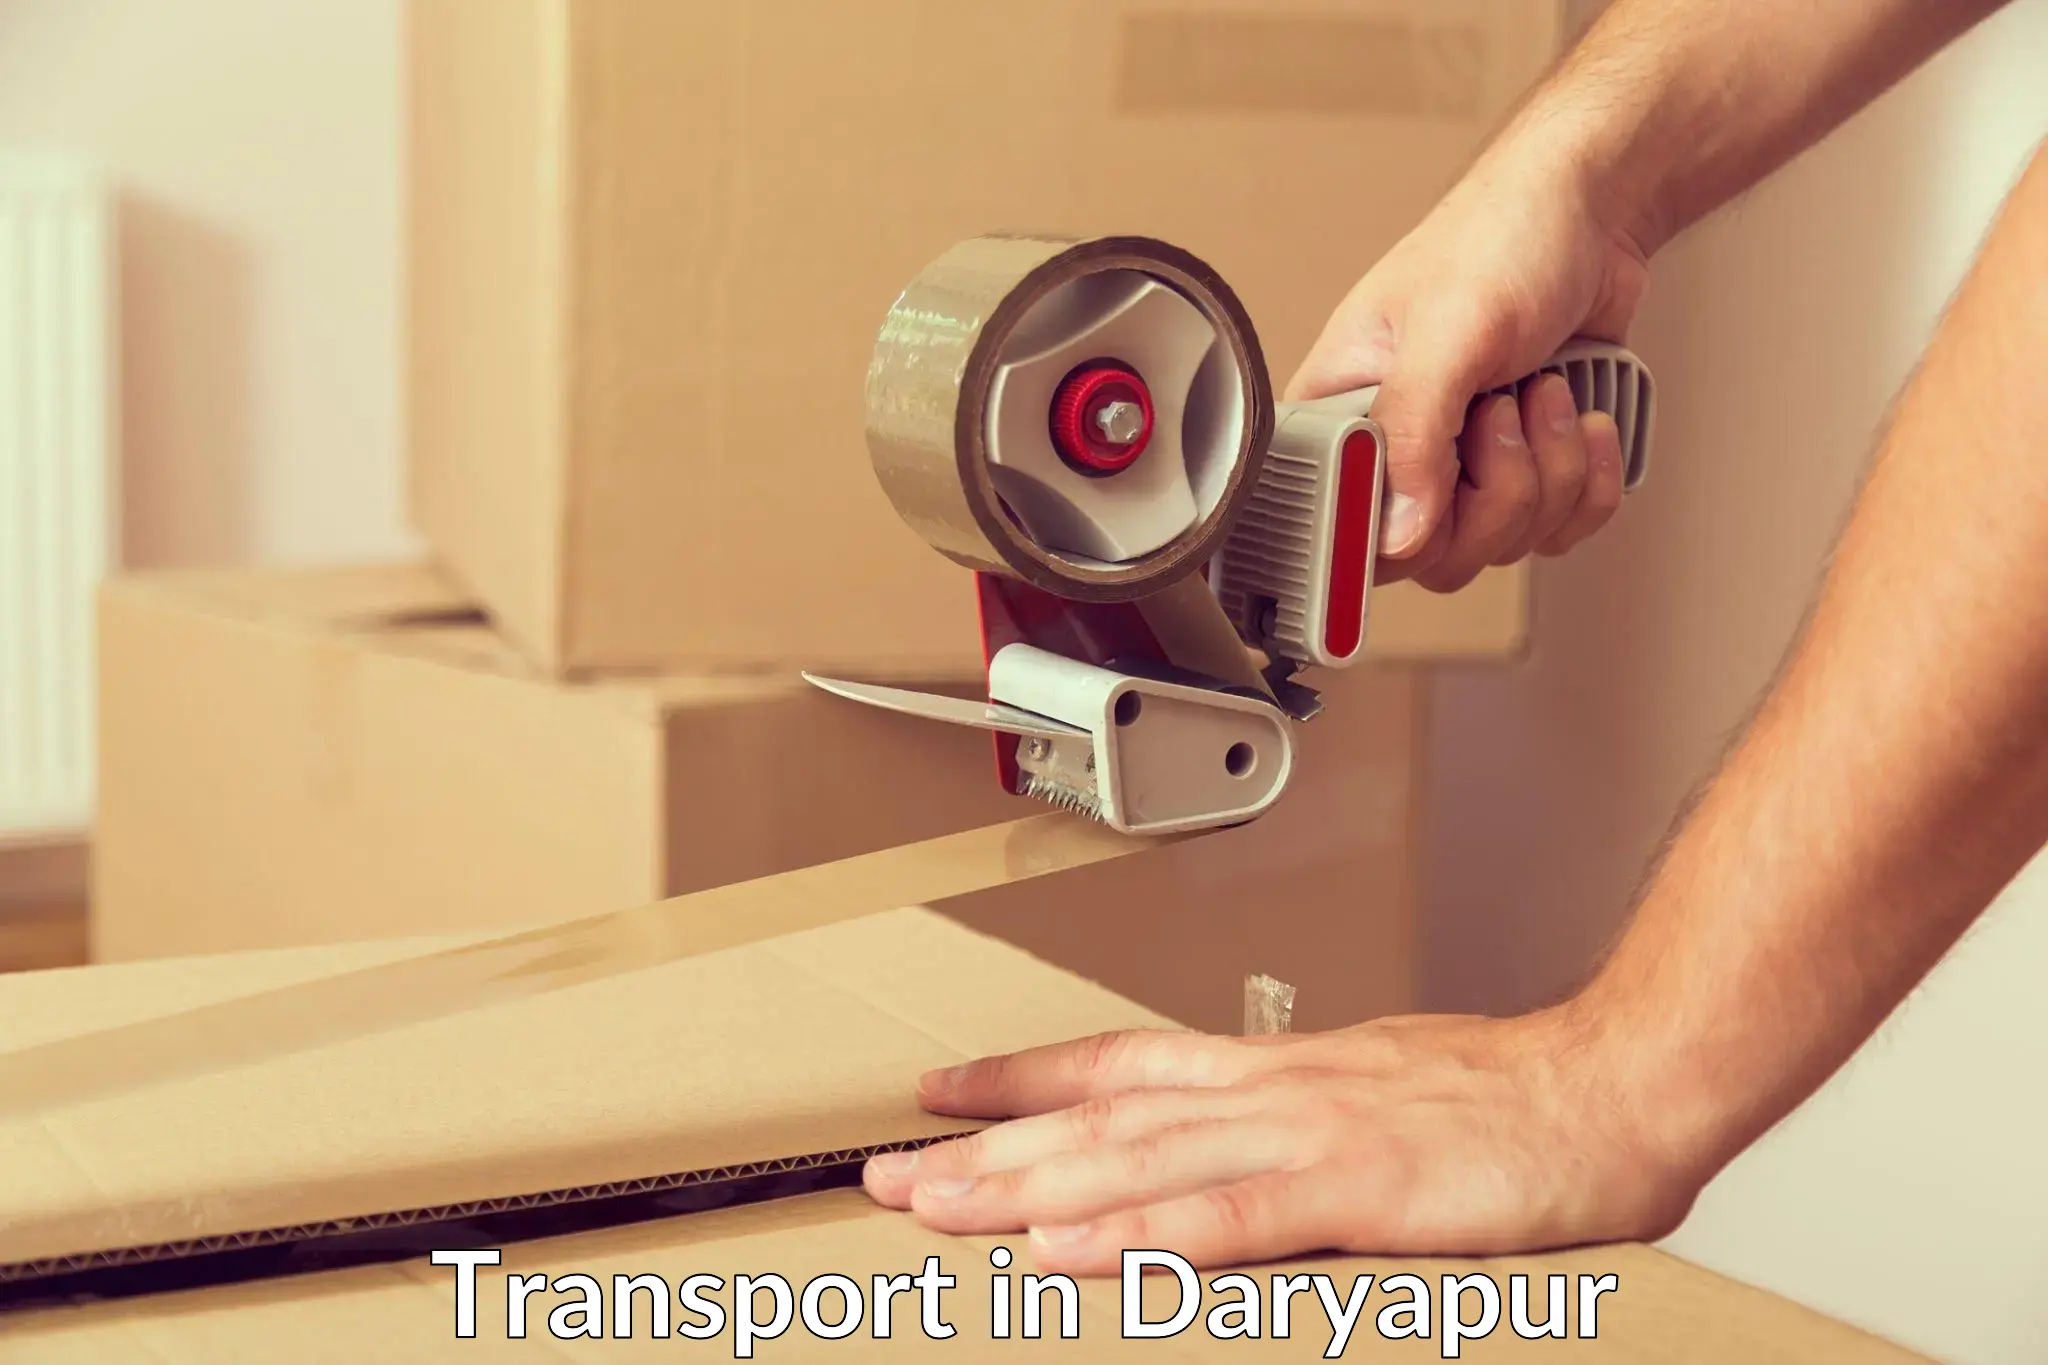 Air cargo transport services in Daryapur